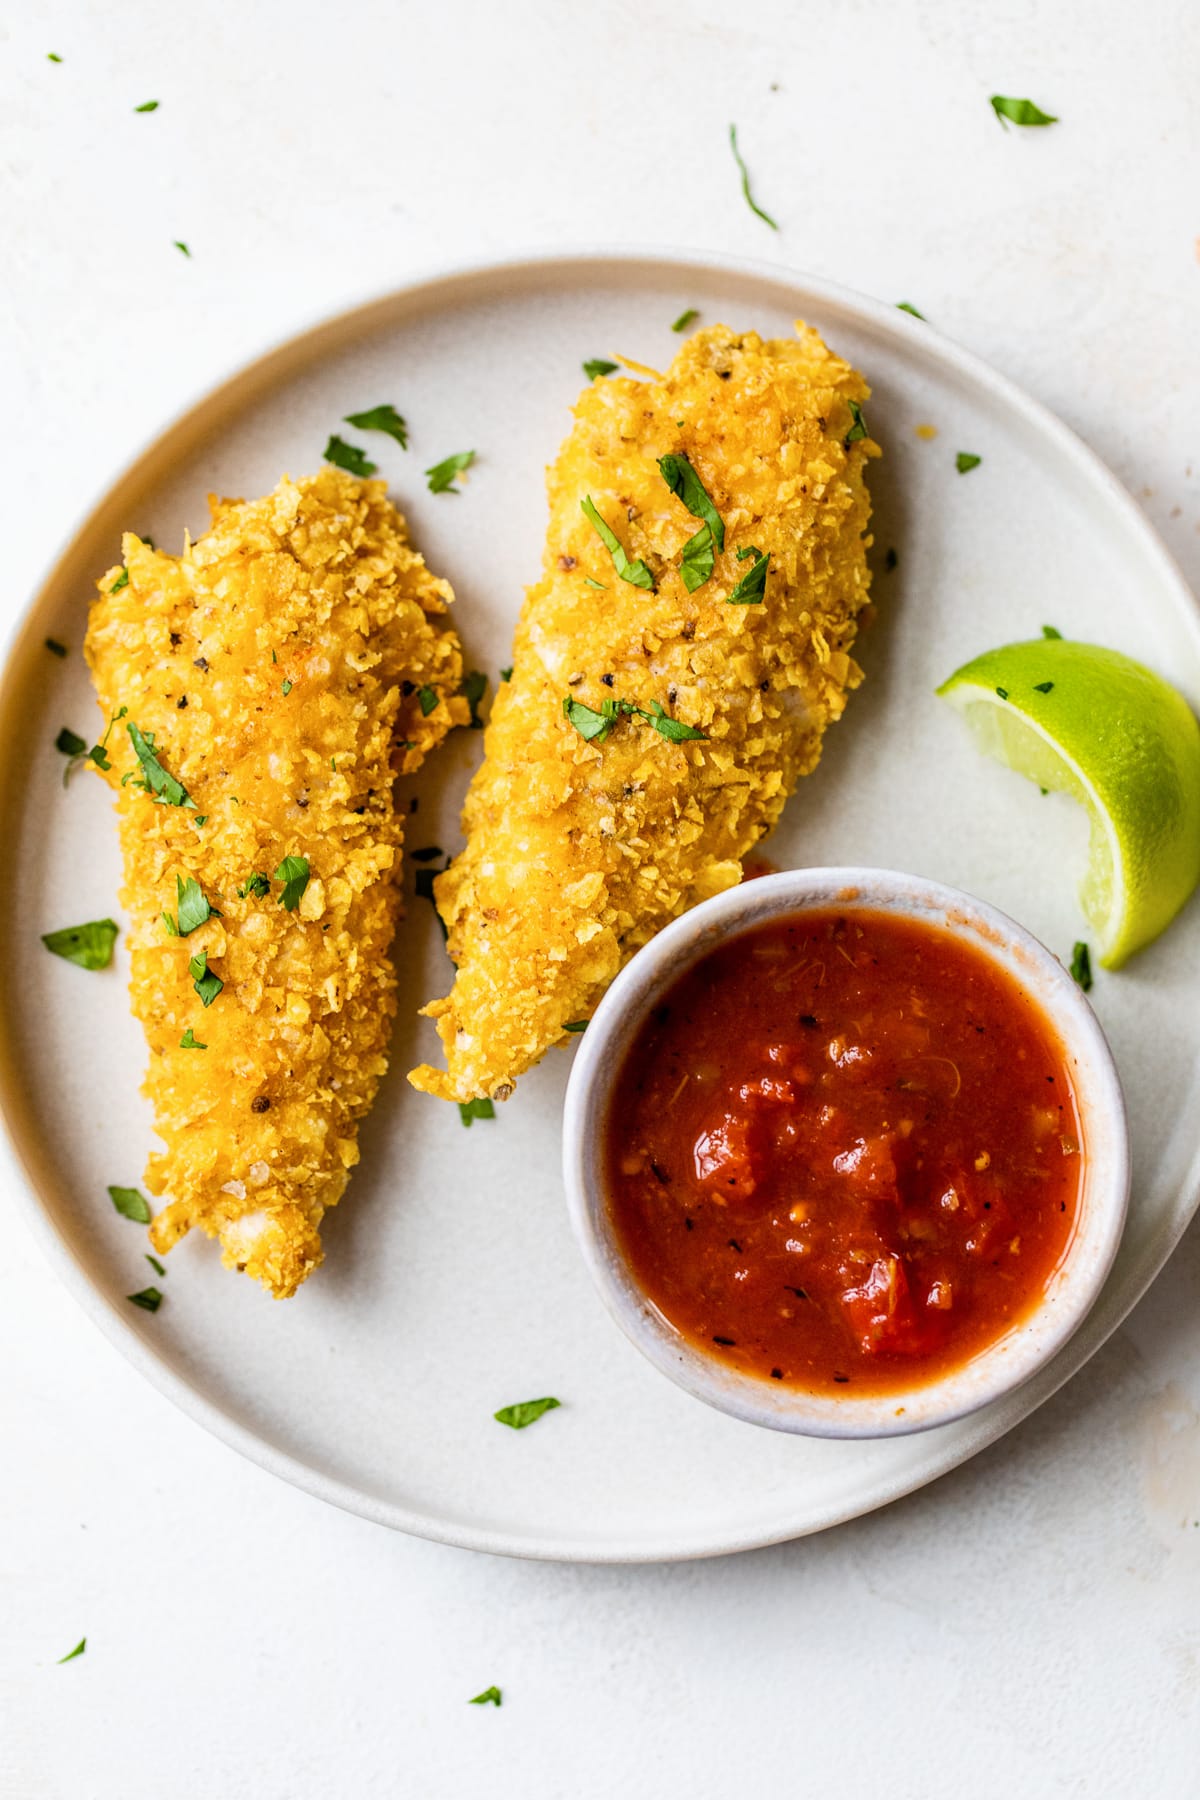 Tortilla-crusted chicken tenders with salsa